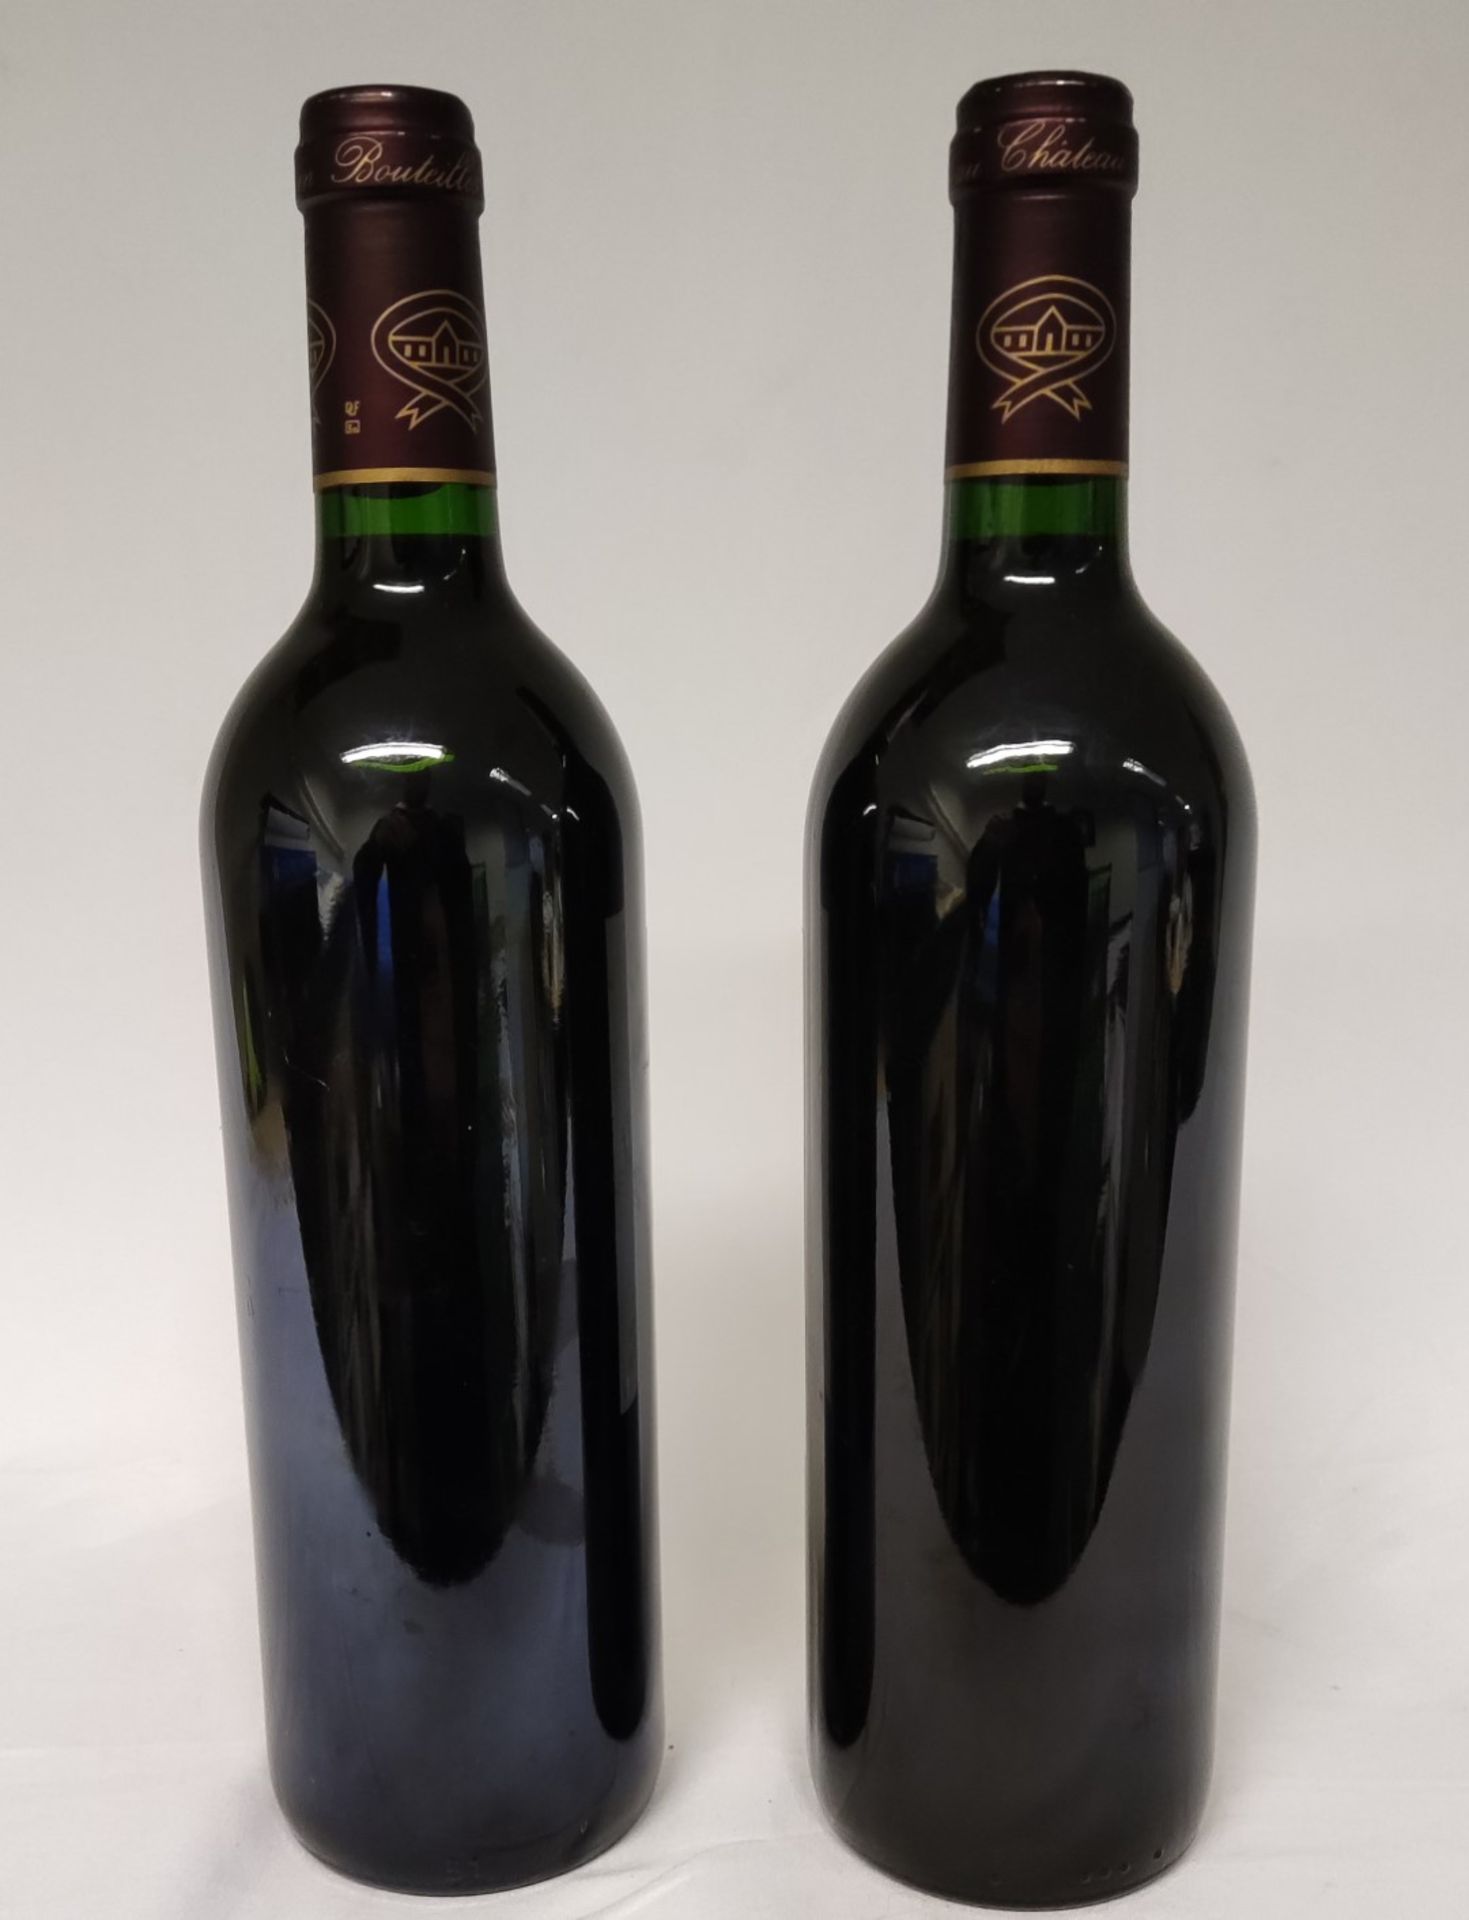 2 x Bottles of 1996 Chateau Sociando-Mallet, Haut-Medoc, France - Dry Red Wine - RRP £260 - Image 7 of 7